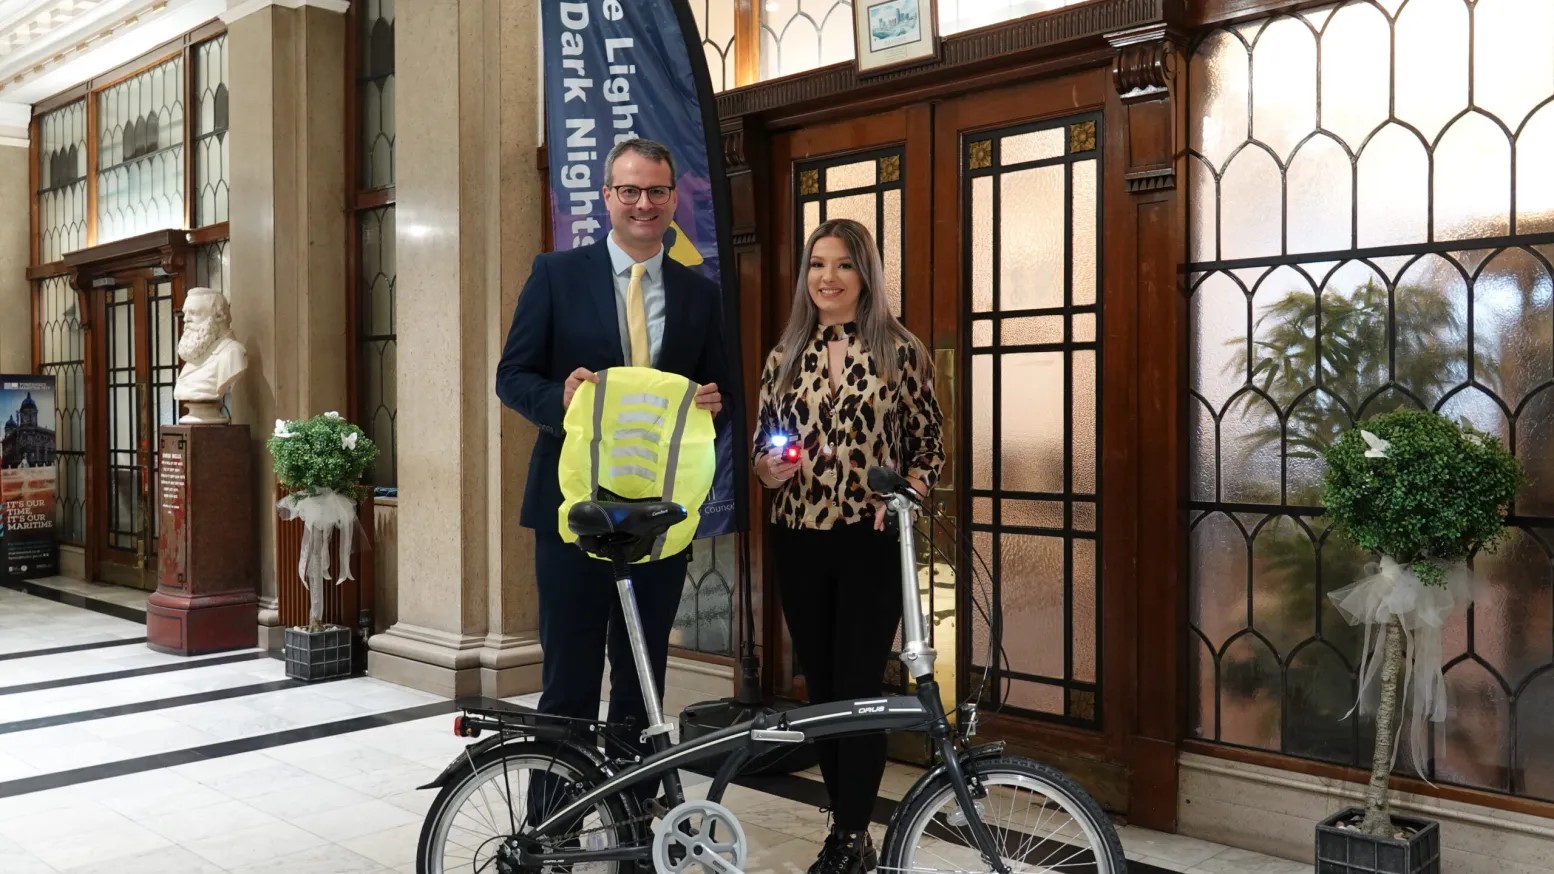 Pictured in the image: Caitlynne Picott Travel  Plan Officer, Hull City Council & Councillor Mark Ieronimo, cabinet portfolio holder for transportation, roads and highways. Stand with bike holding High Viz Vest and lights.